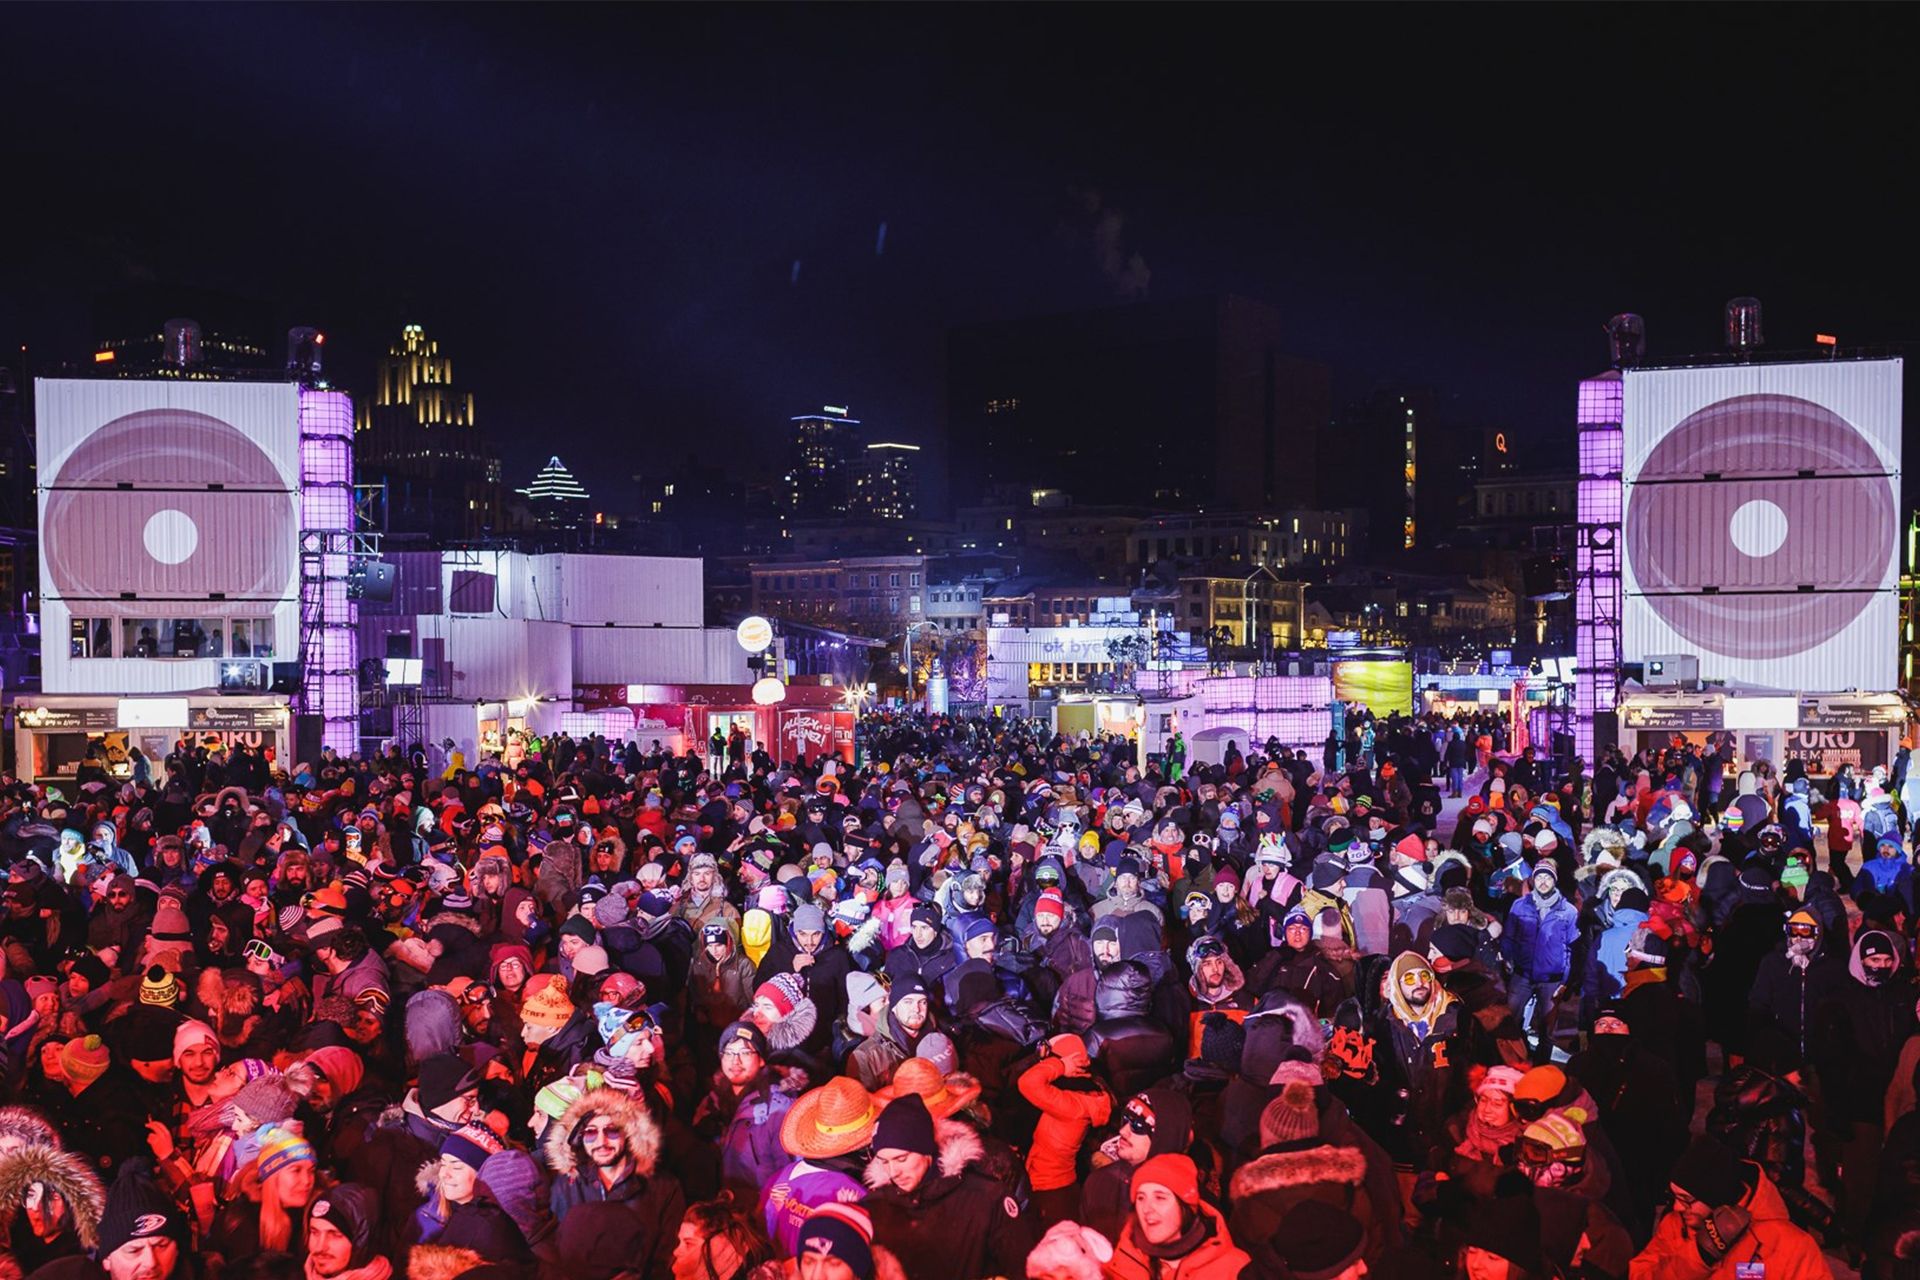 IGLOOFEST RETURNS TO THE OLD PORT OF MONTREAL TO CELEBRATE ITS 15TH SEASON  | Igloofest